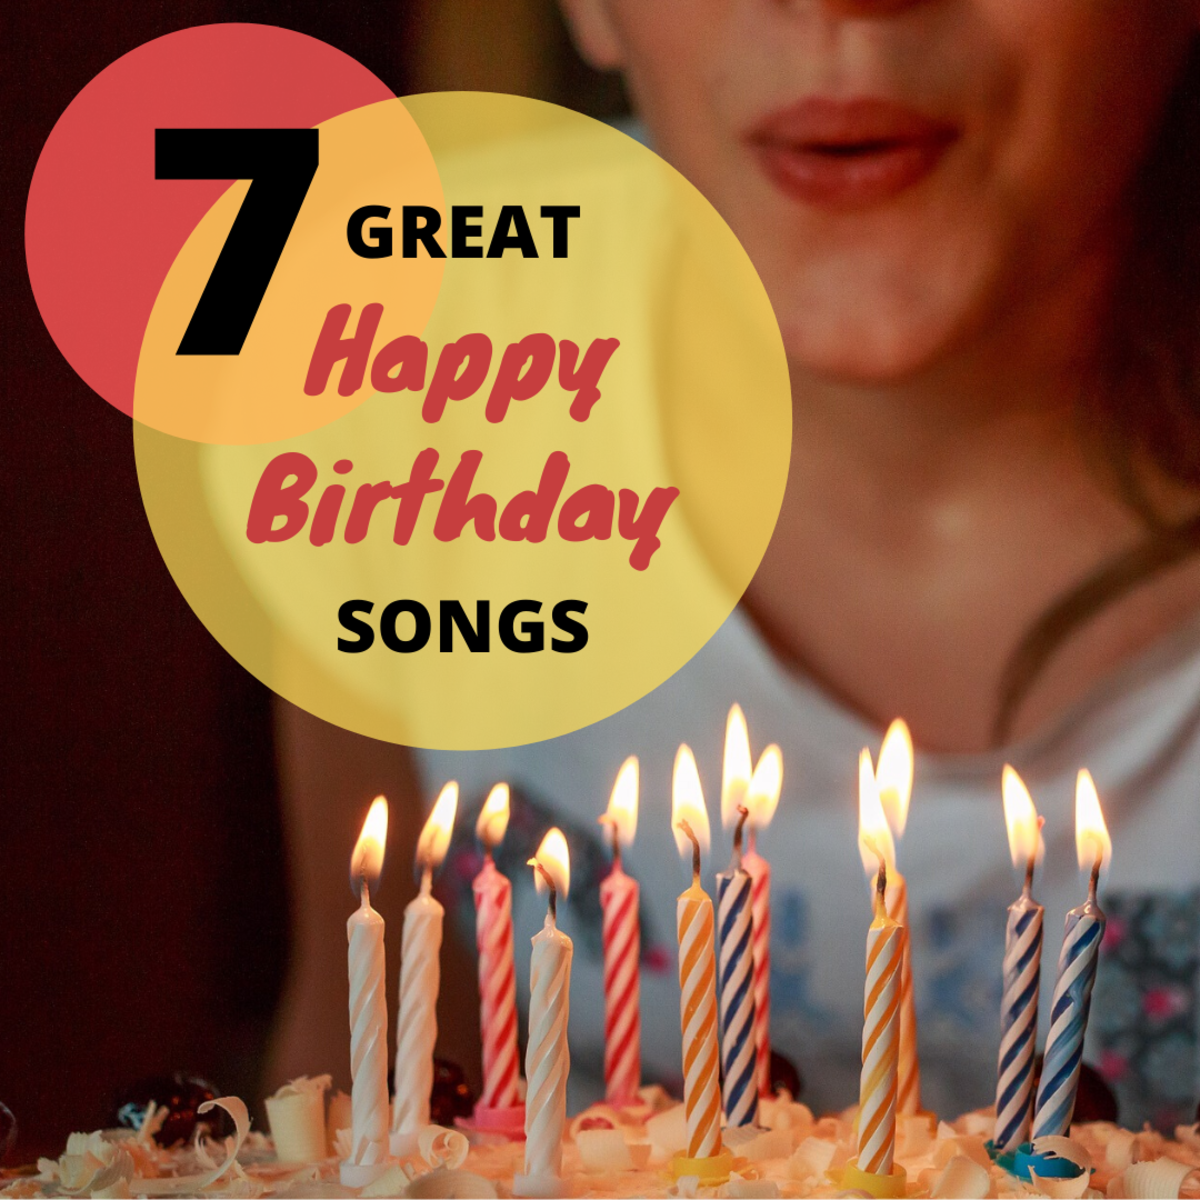 7 Of The Best Happy Birthday Songs Traditional And Funny